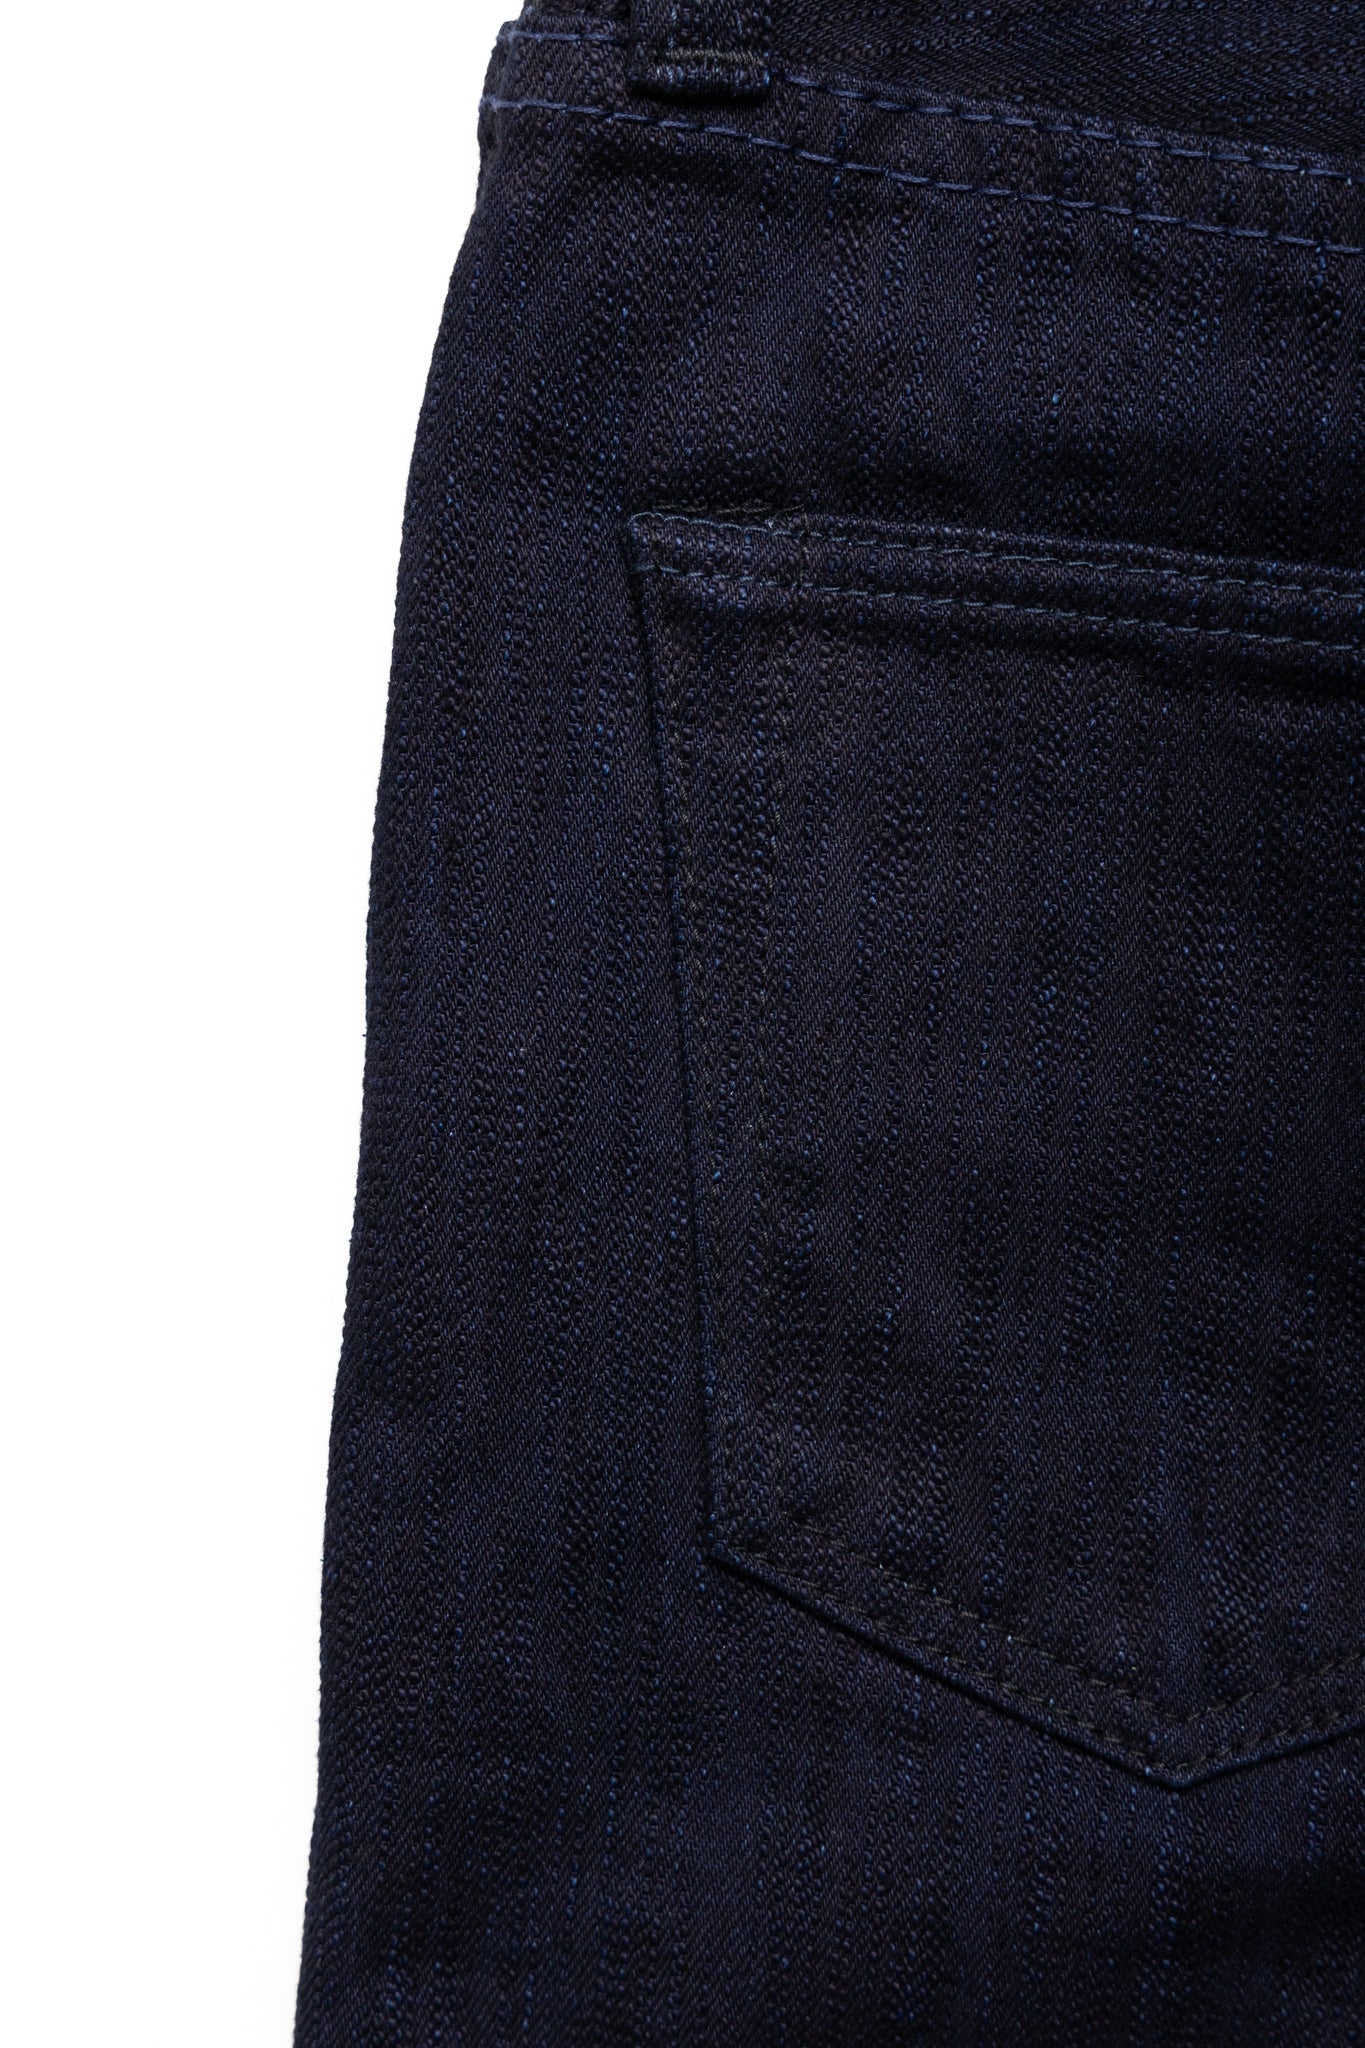 13oz Stretch Denim Relaxed Tapered - Double Indigo